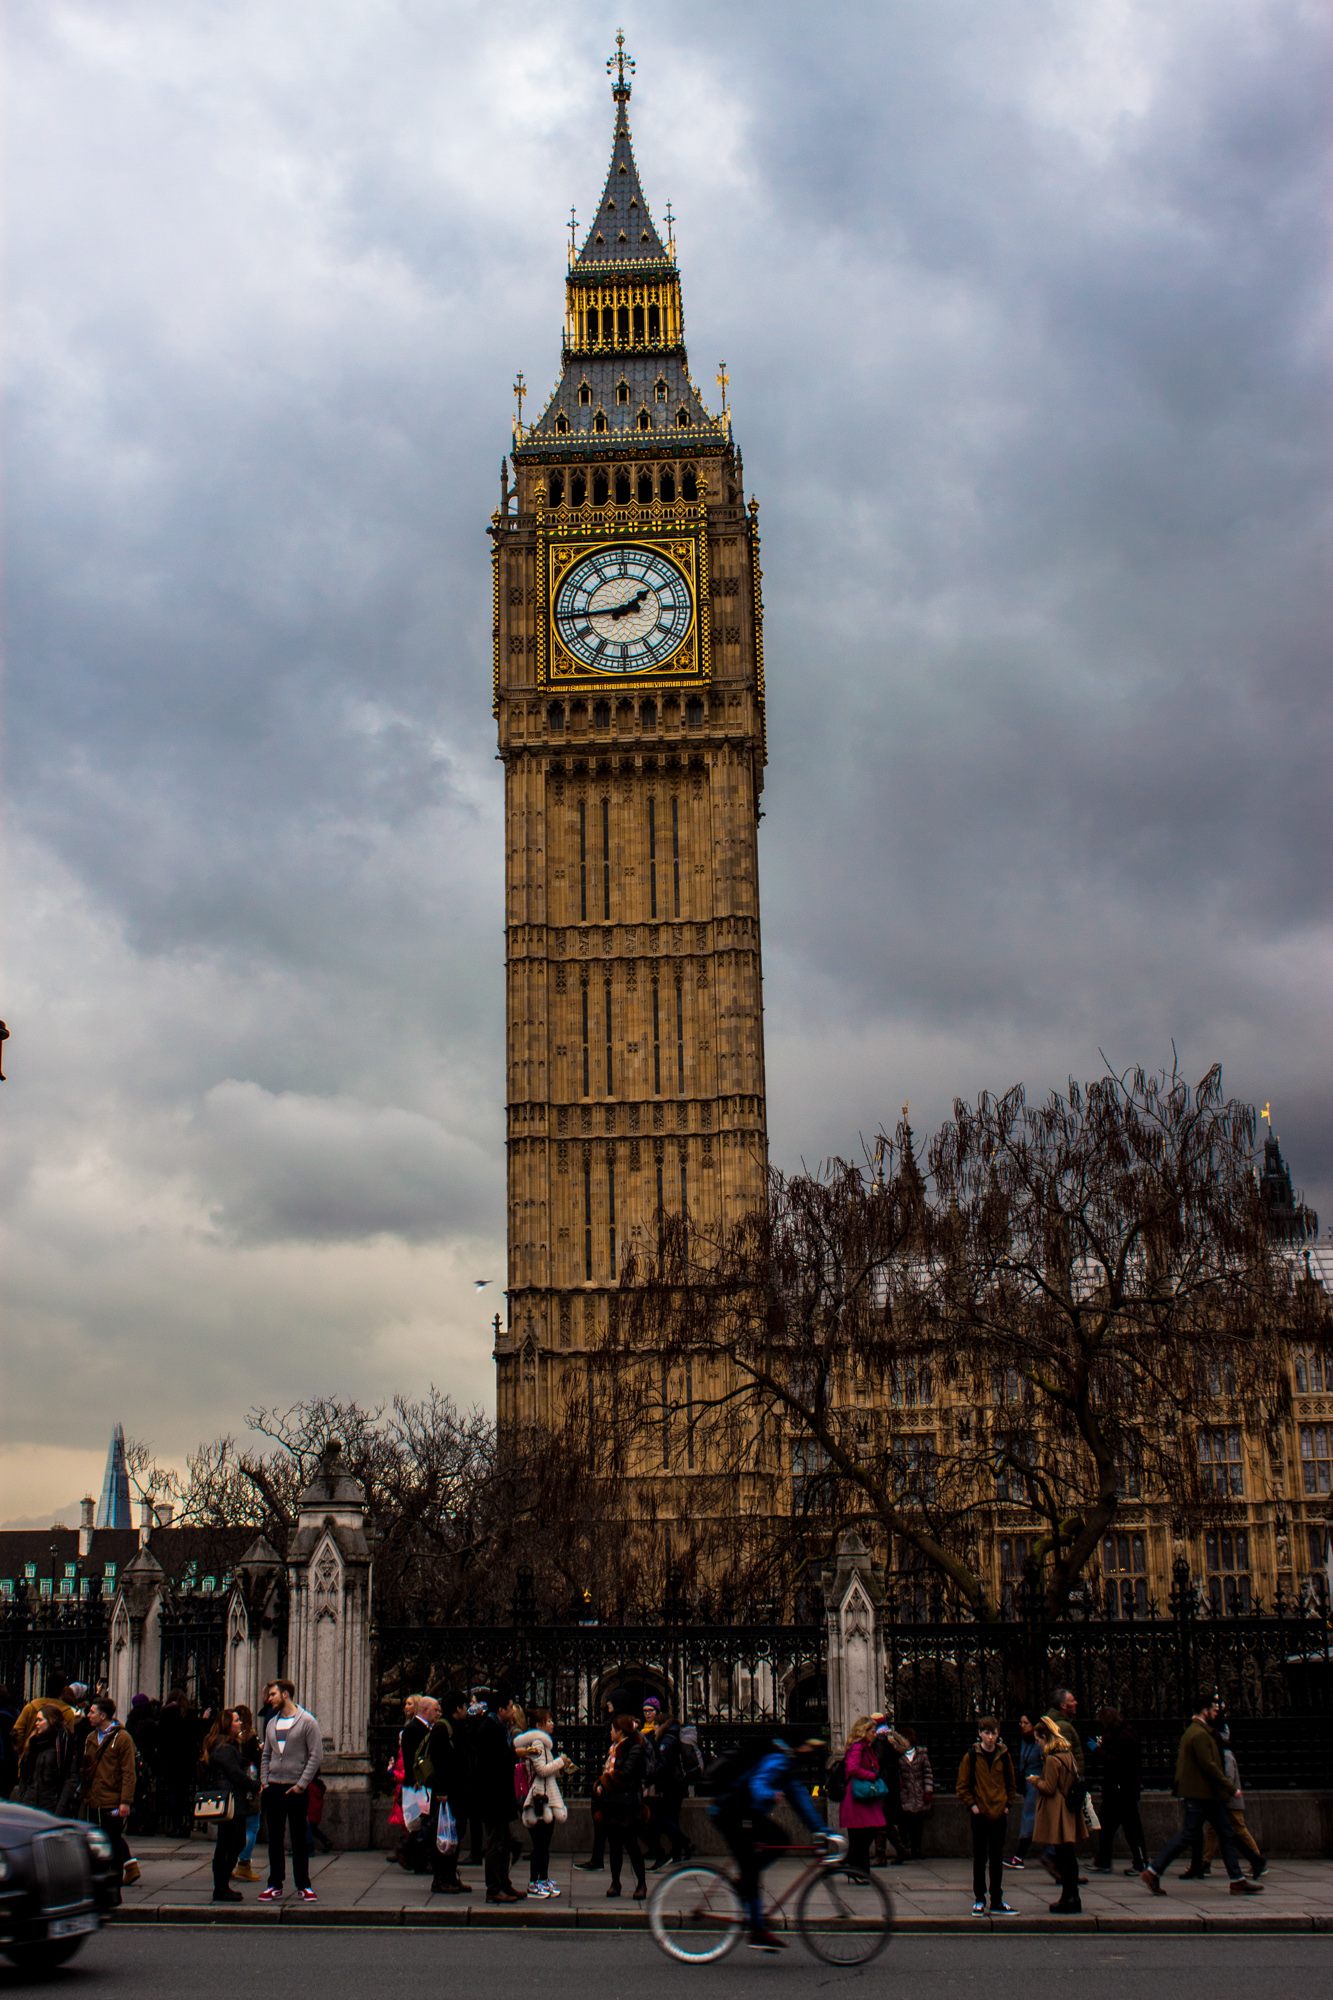 an image of the big ben clock tower in london